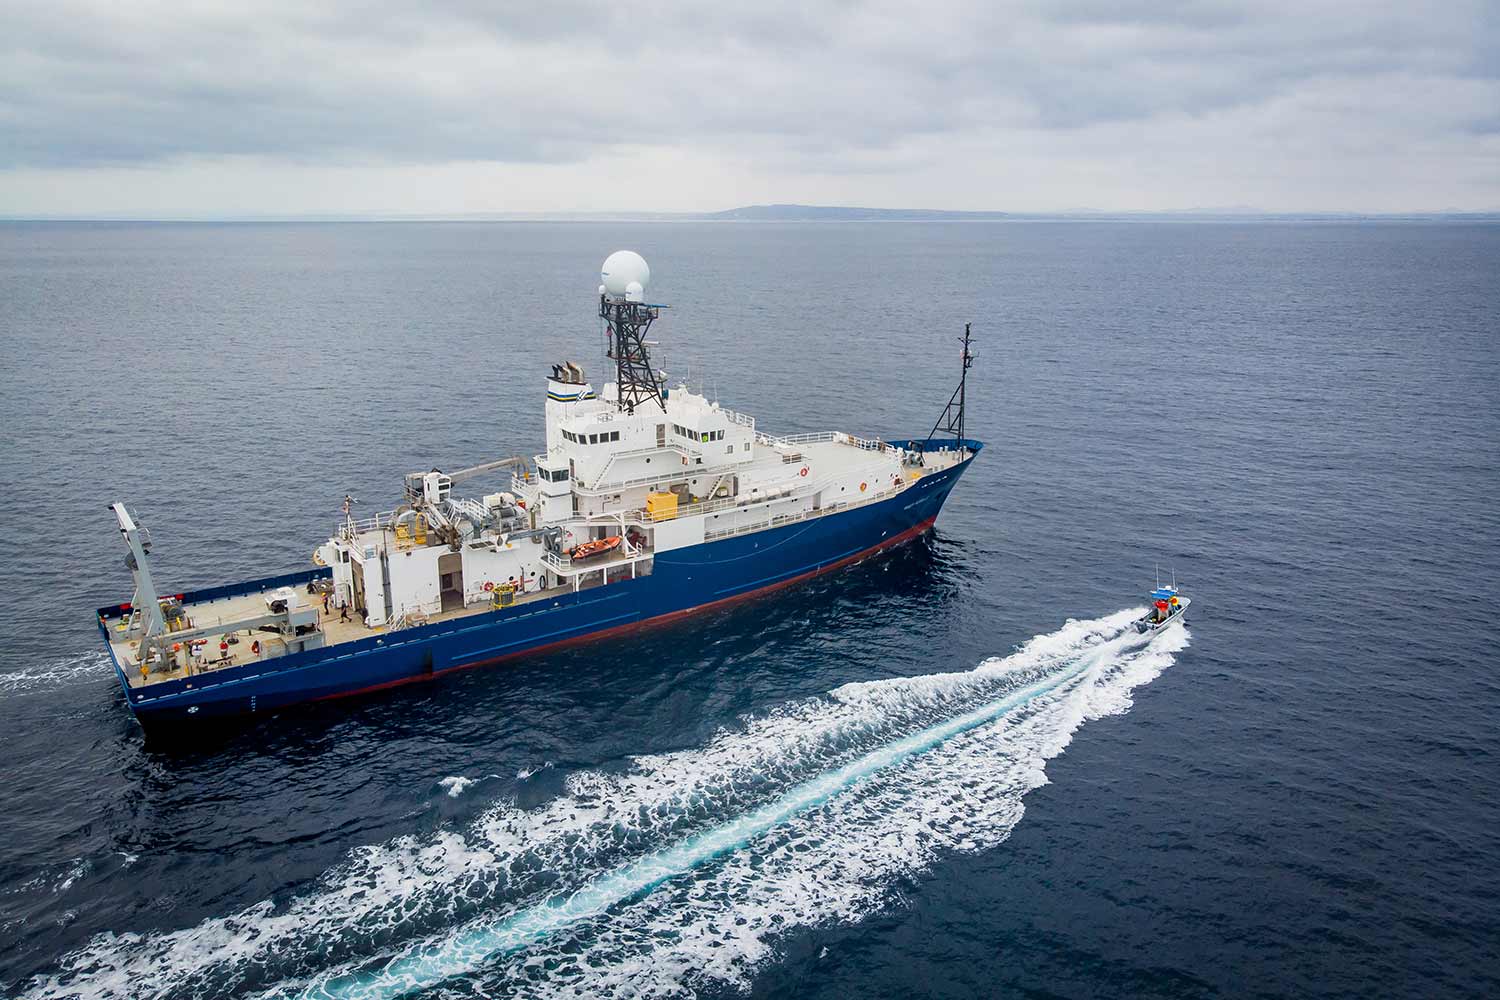 Research Vessel Roger Revelle heads back to sea after the completion of the midlife refit, which will extend the service life of the ship by up to 20 years.